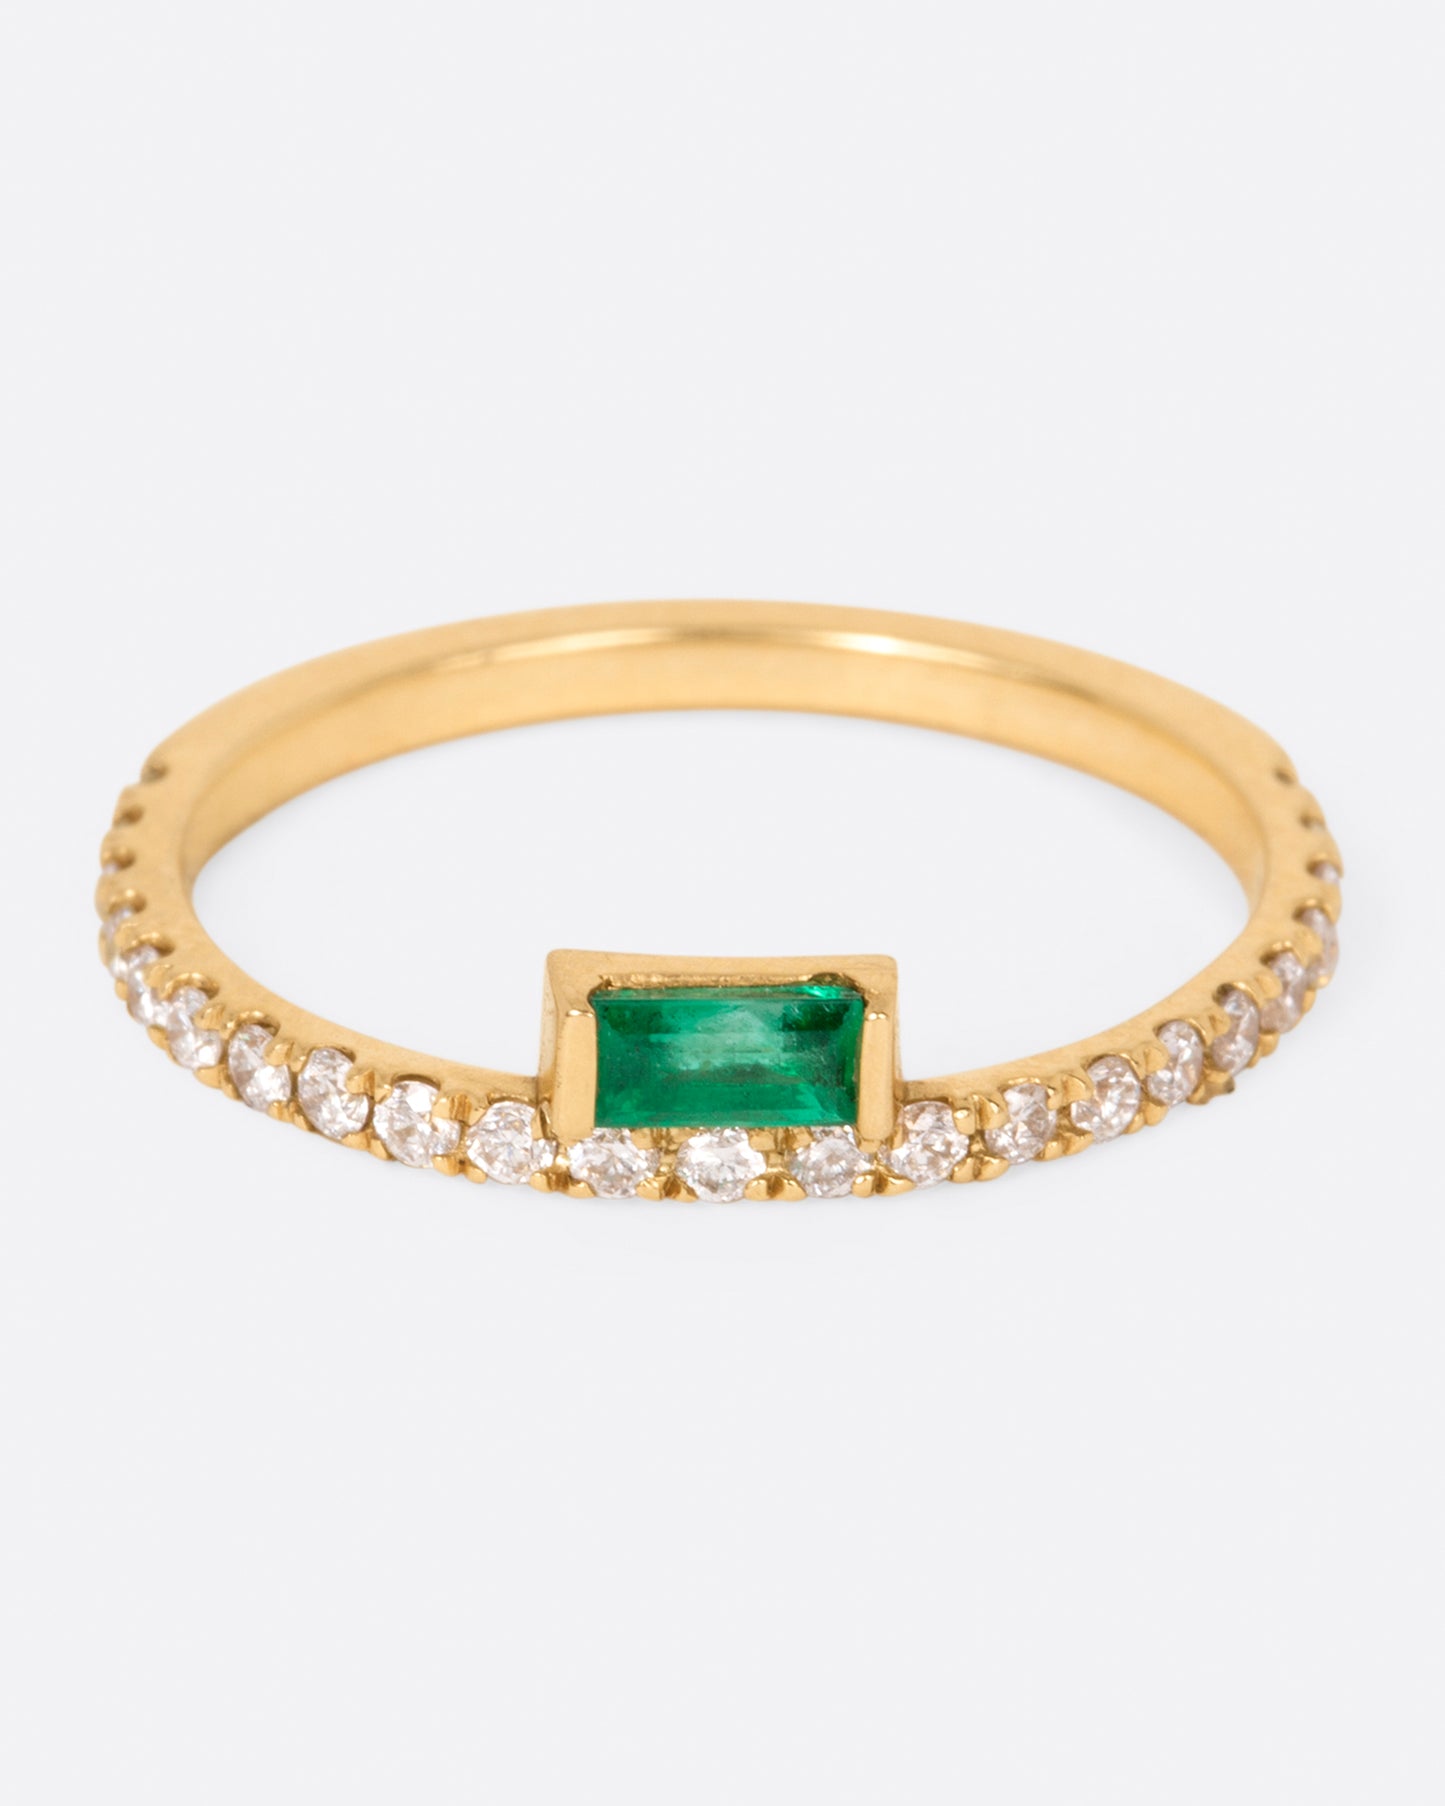 A yellow gold ring with white diamonds going 2/3 of the way around and an emerald baguette sitting atop it, shown from the front.